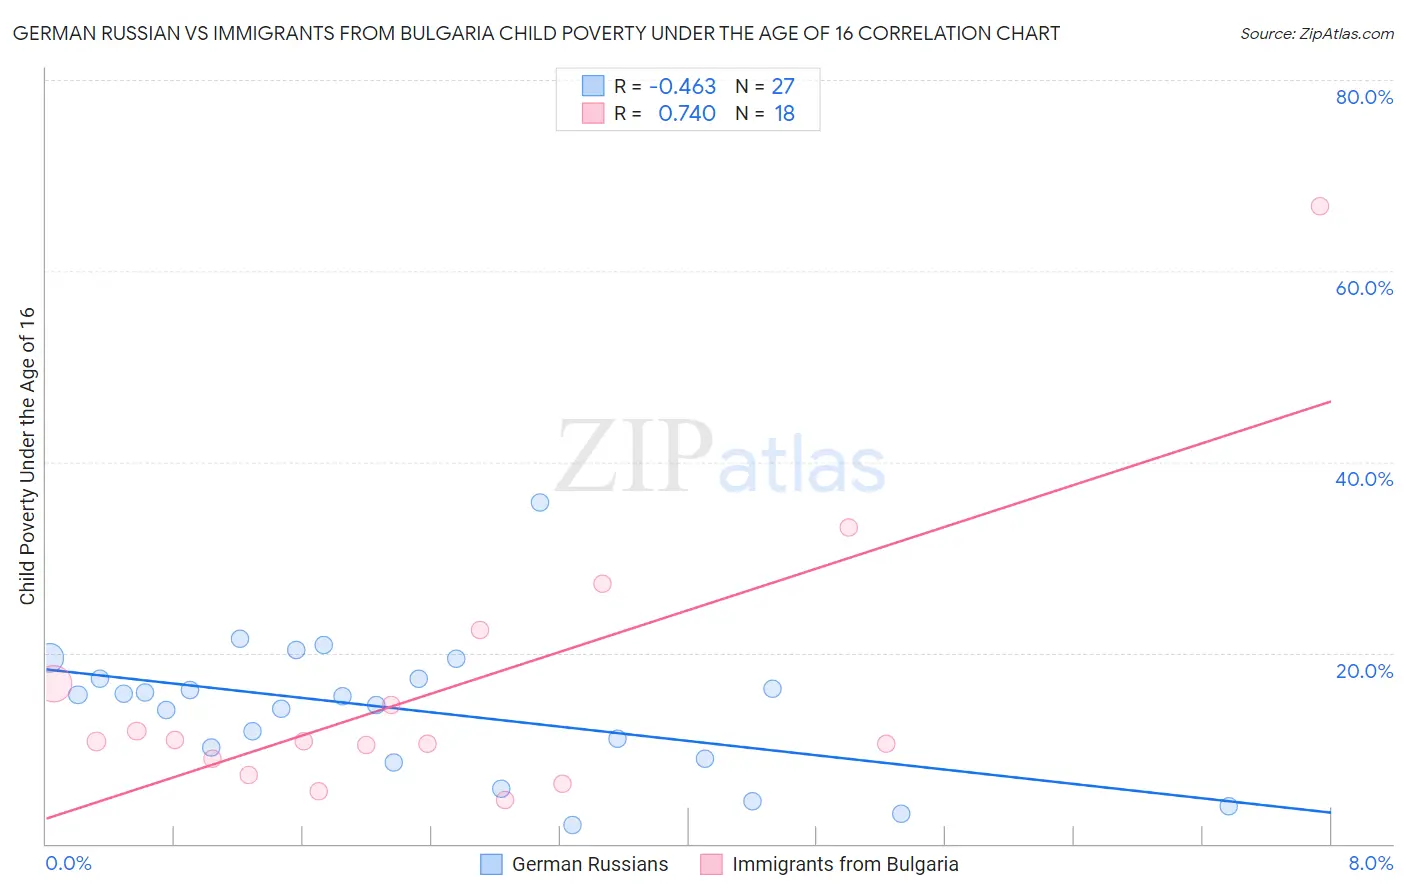 German Russian vs Immigrants from Bulgaria Child Poverty Under the Age of 16